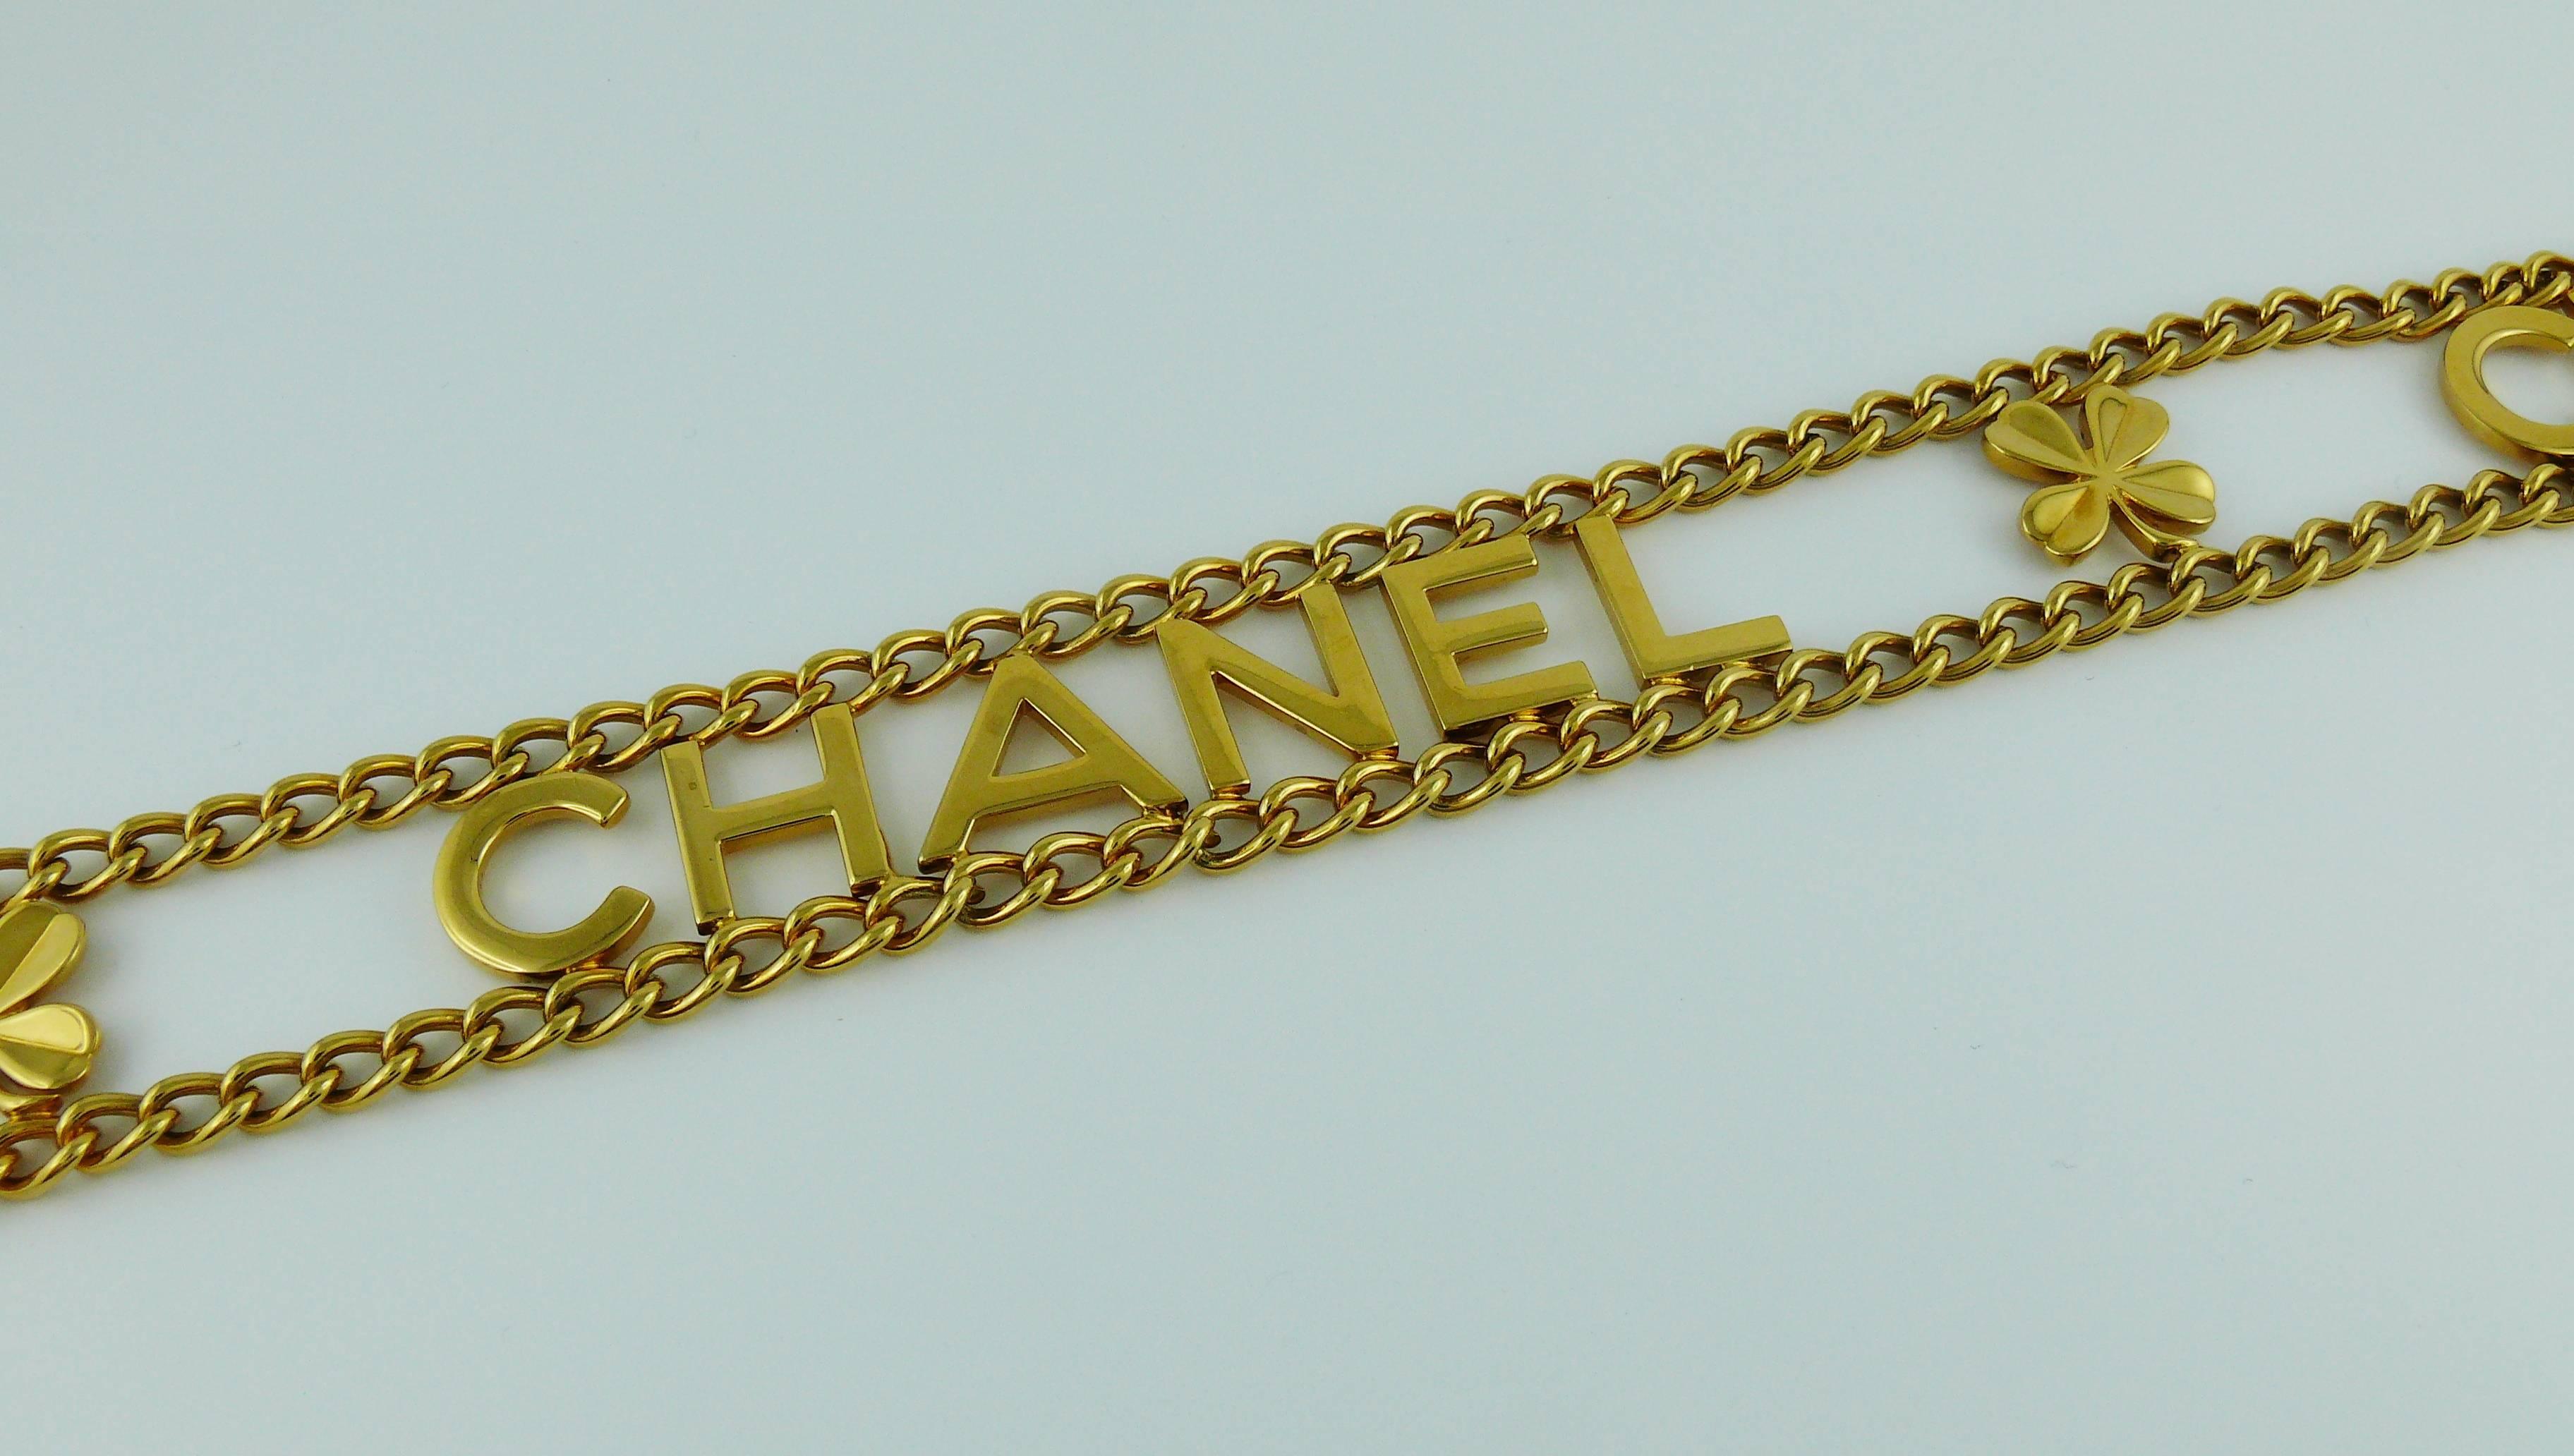 Chanel Vintage Gold Toned Chain Belt with Chanel Letters and Clovers, 1998  2